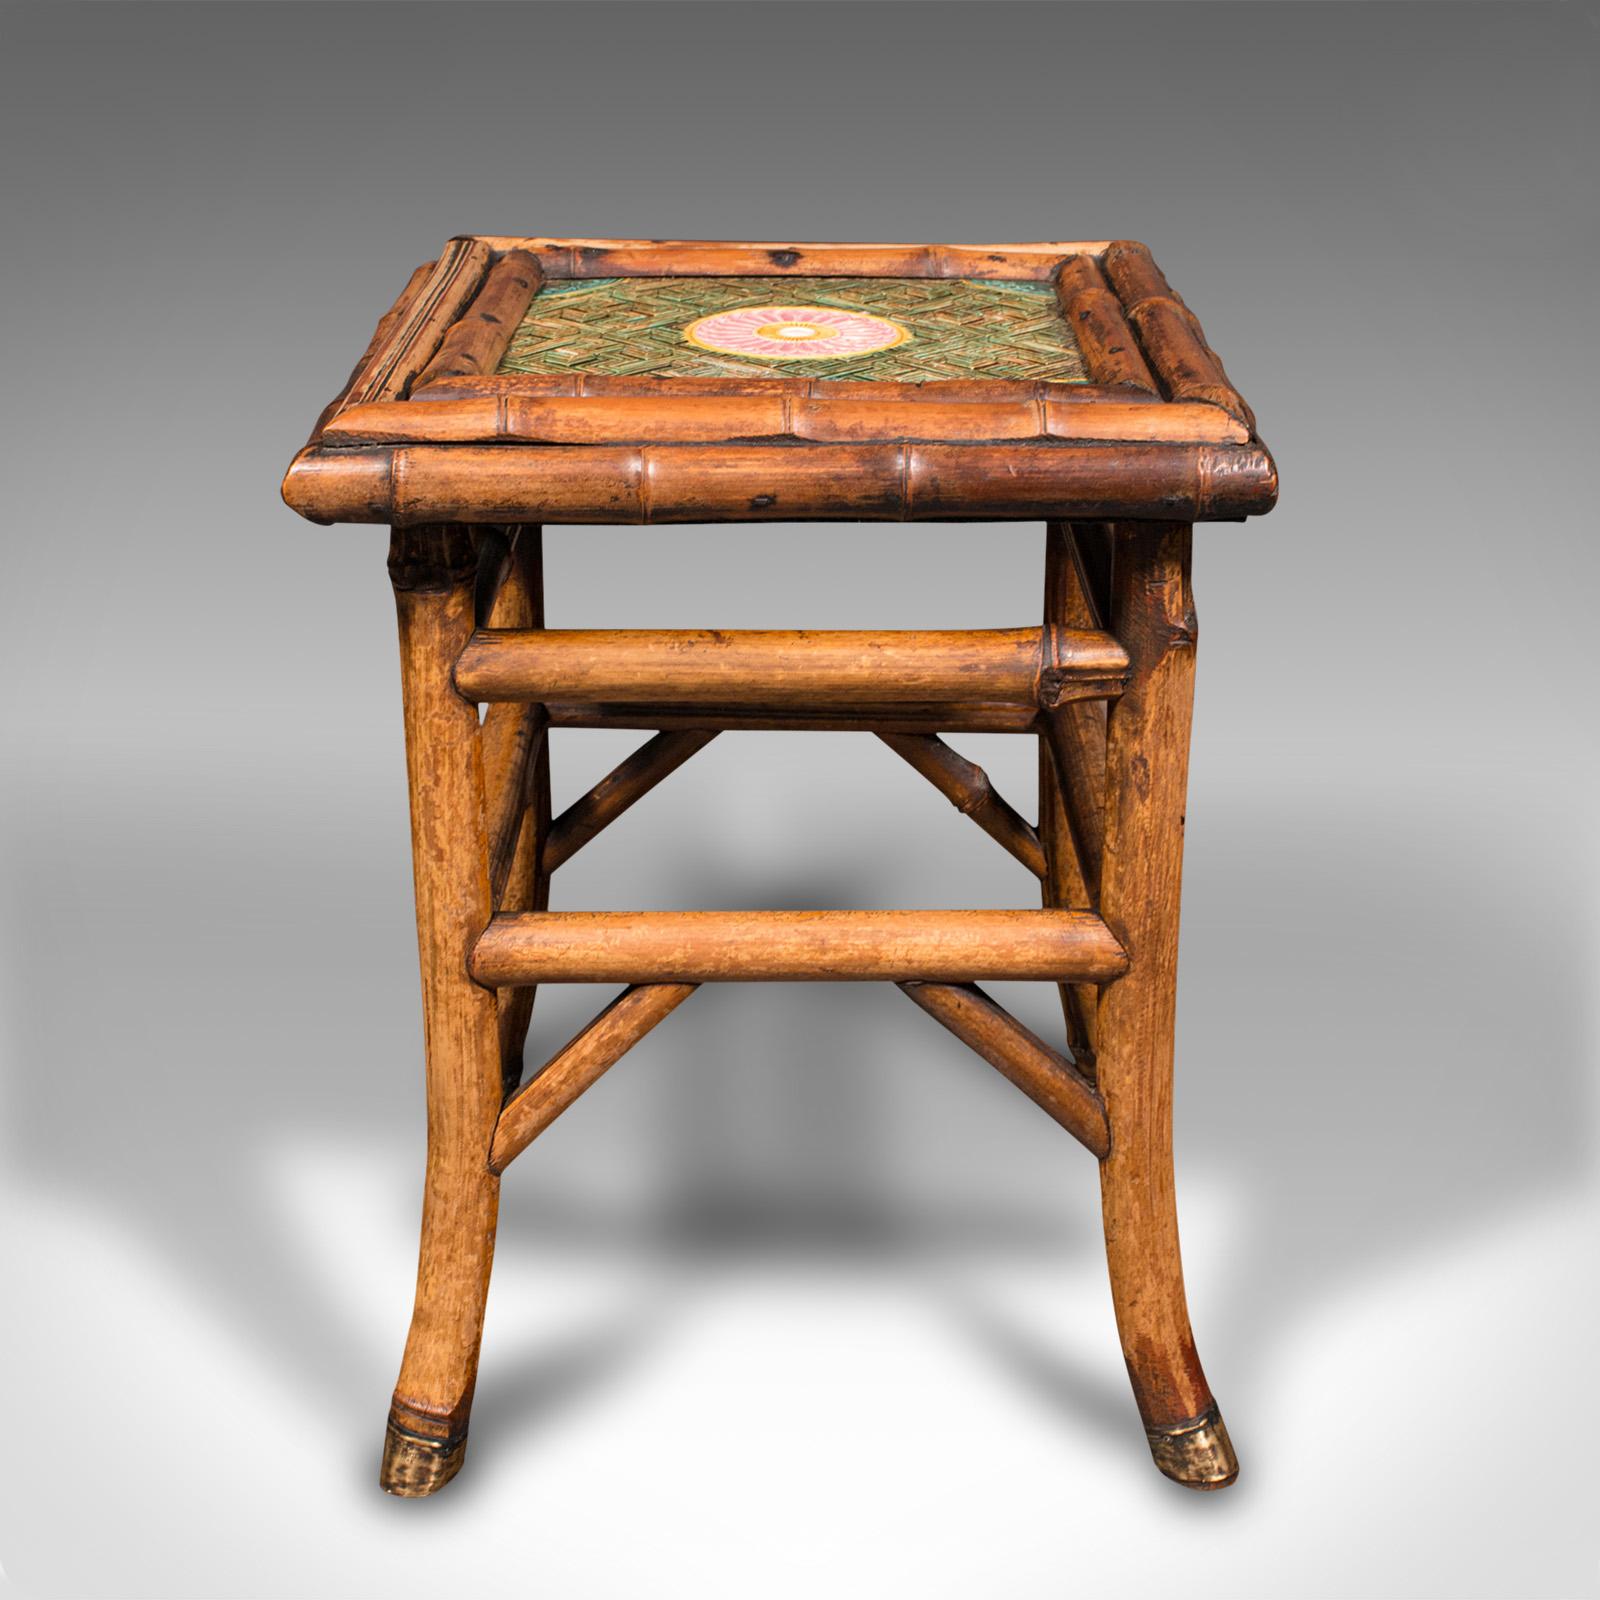 Small Antique Lamp Table, English, Bamboo, Ceramic, Side, WF Needham, Victorian In Good Condition For Sale In Hele, Devon, GB